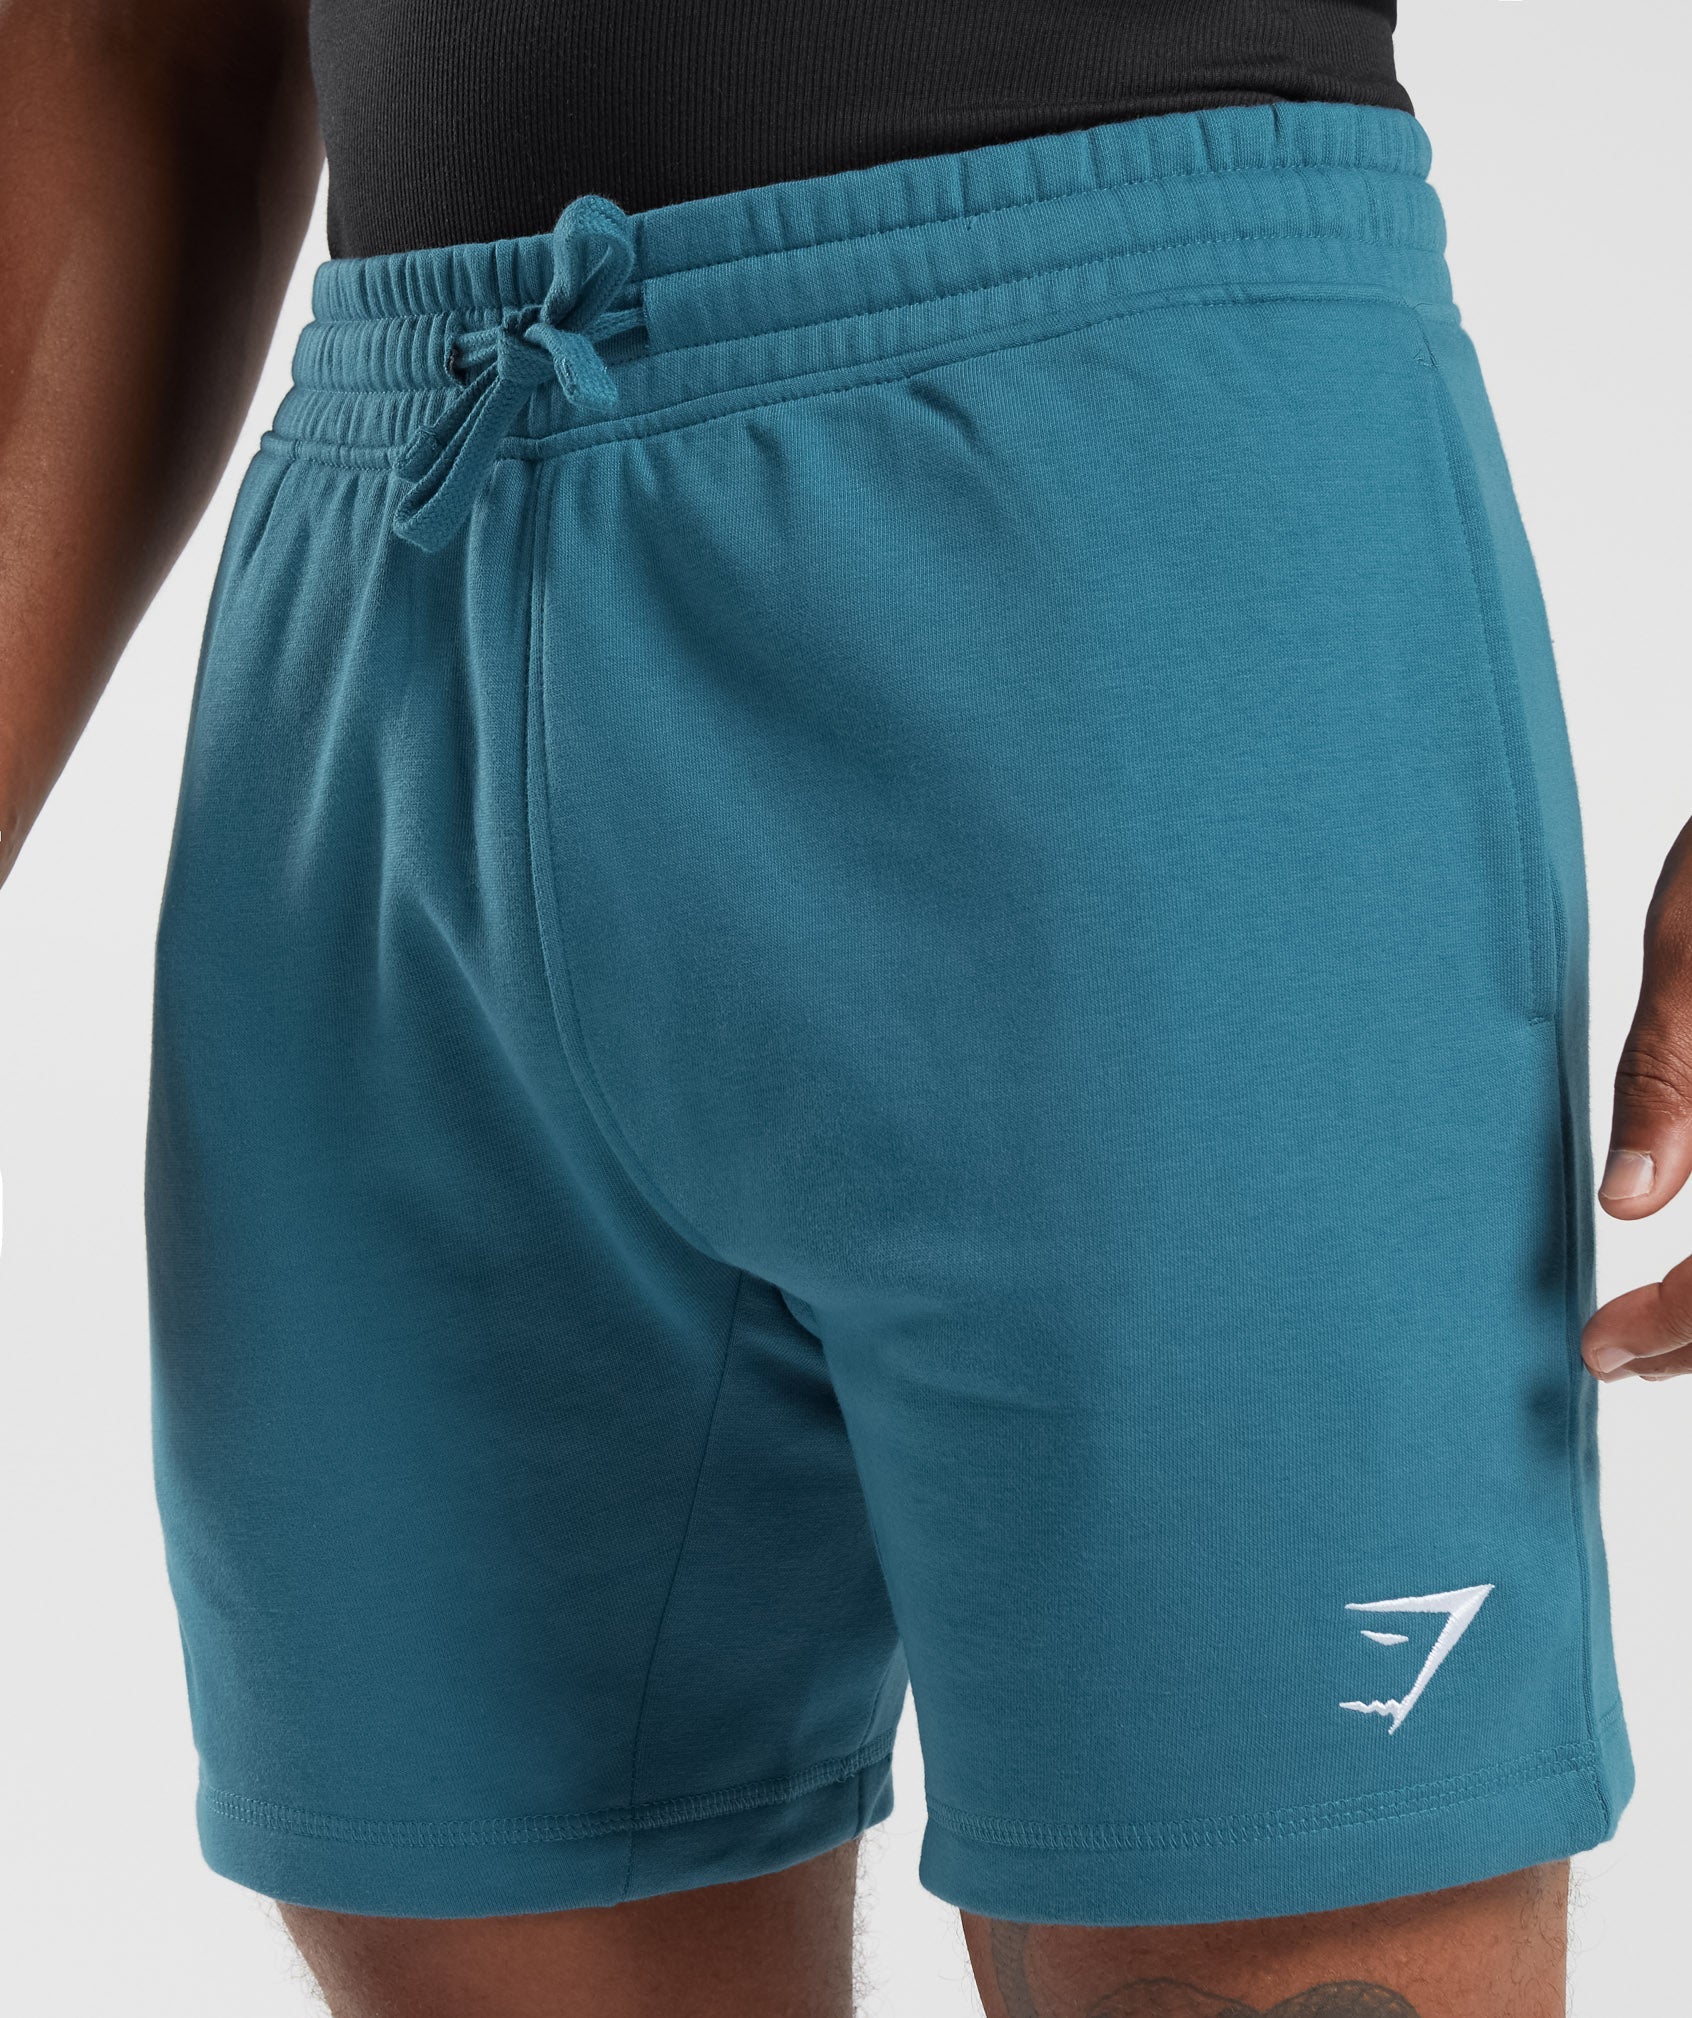 Crest 7" Shorts in Terrace Blue - view 6